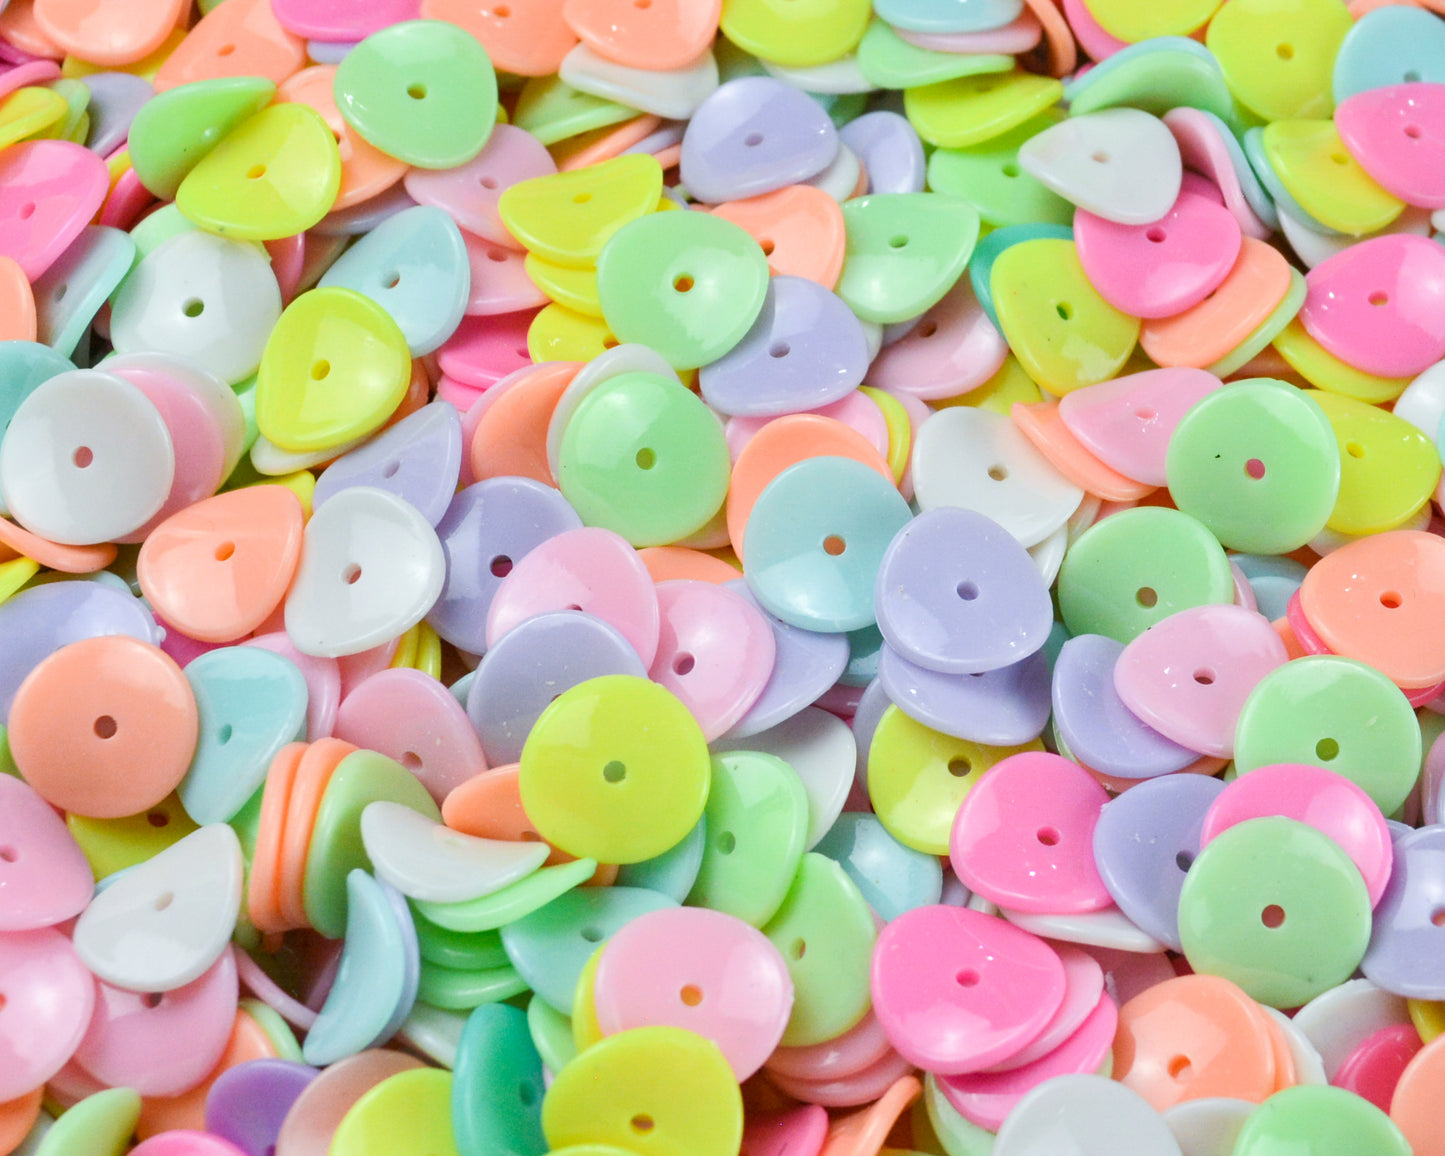 15x5mm Wavy Disc Beads in Pastel Colored Acrylic